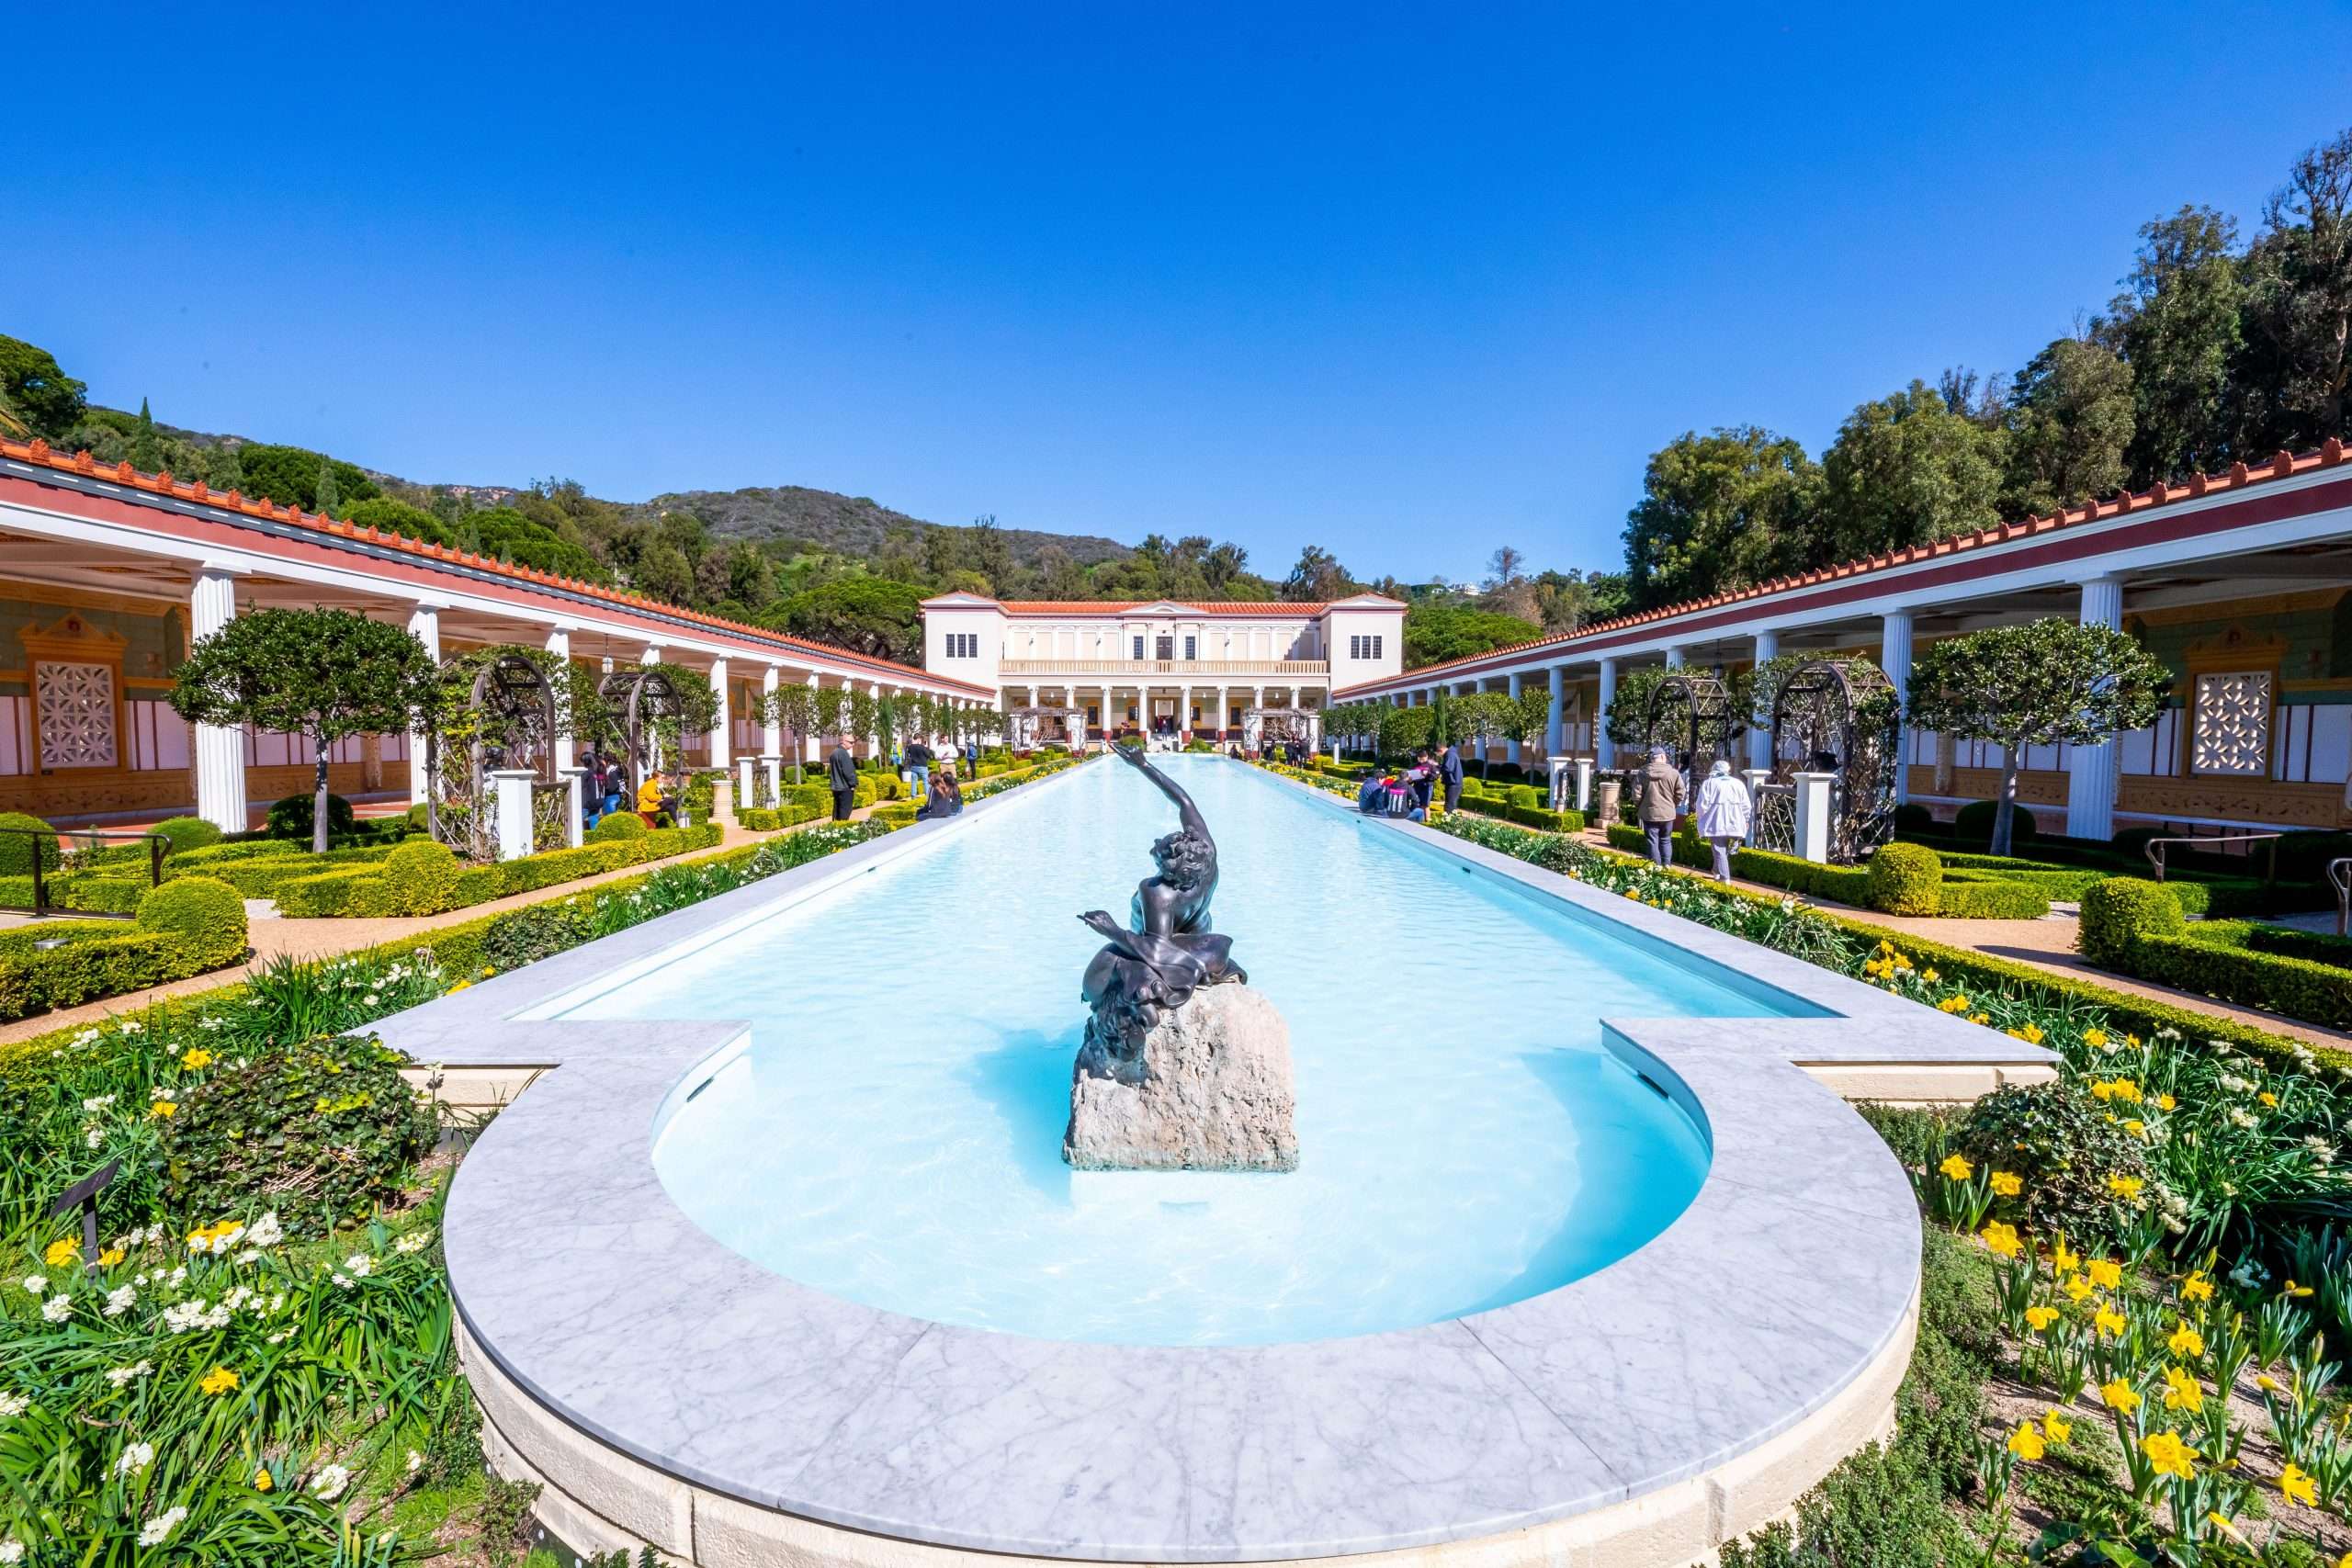 The Getty Villa Museum in LA: What You Need to Know